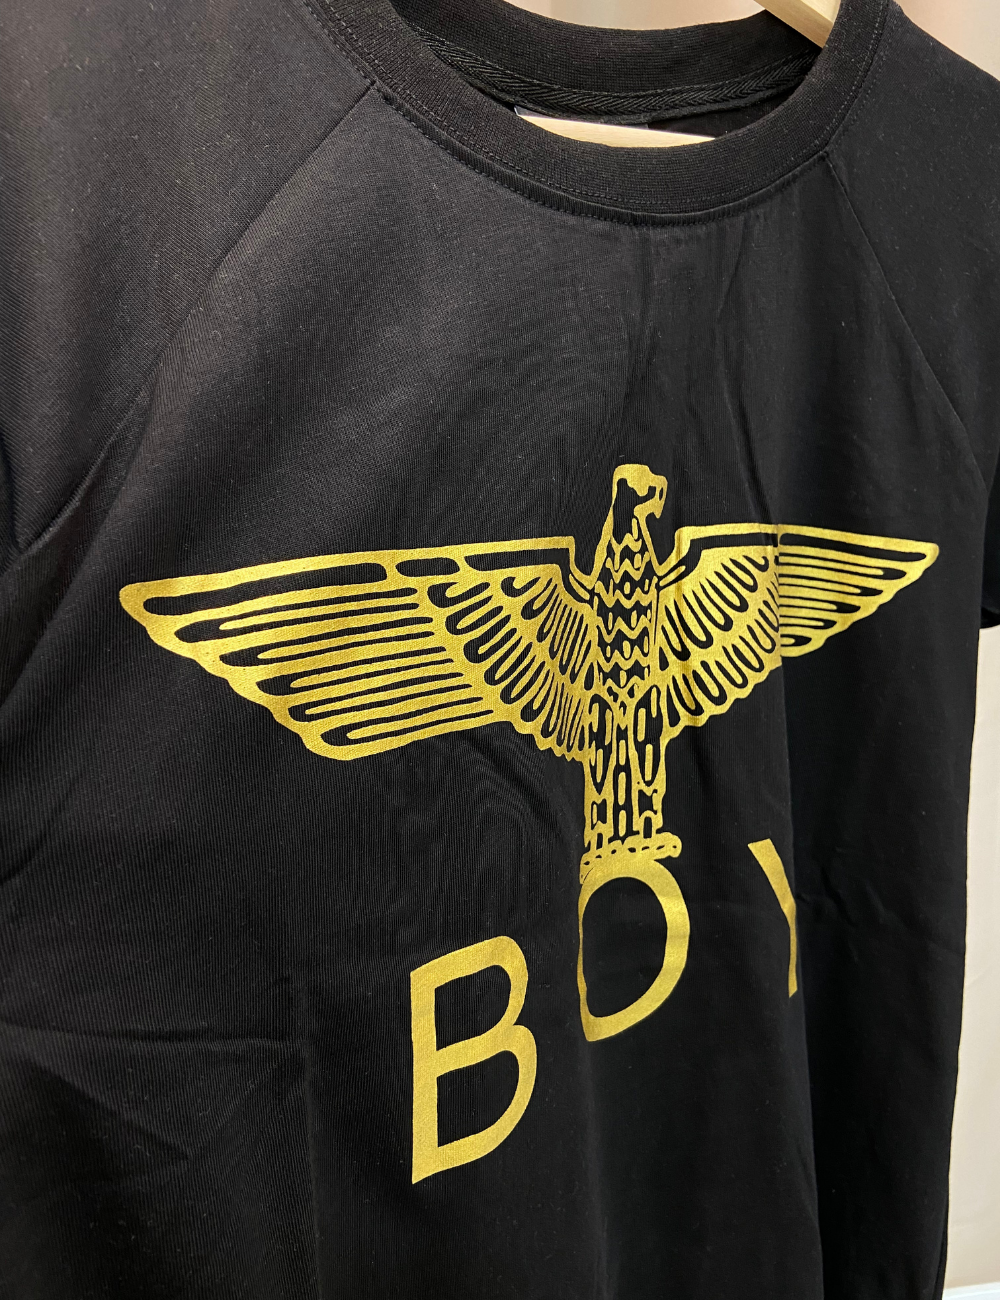 Boy London Grey Gold Eagle Feather Wings Tee (Black)